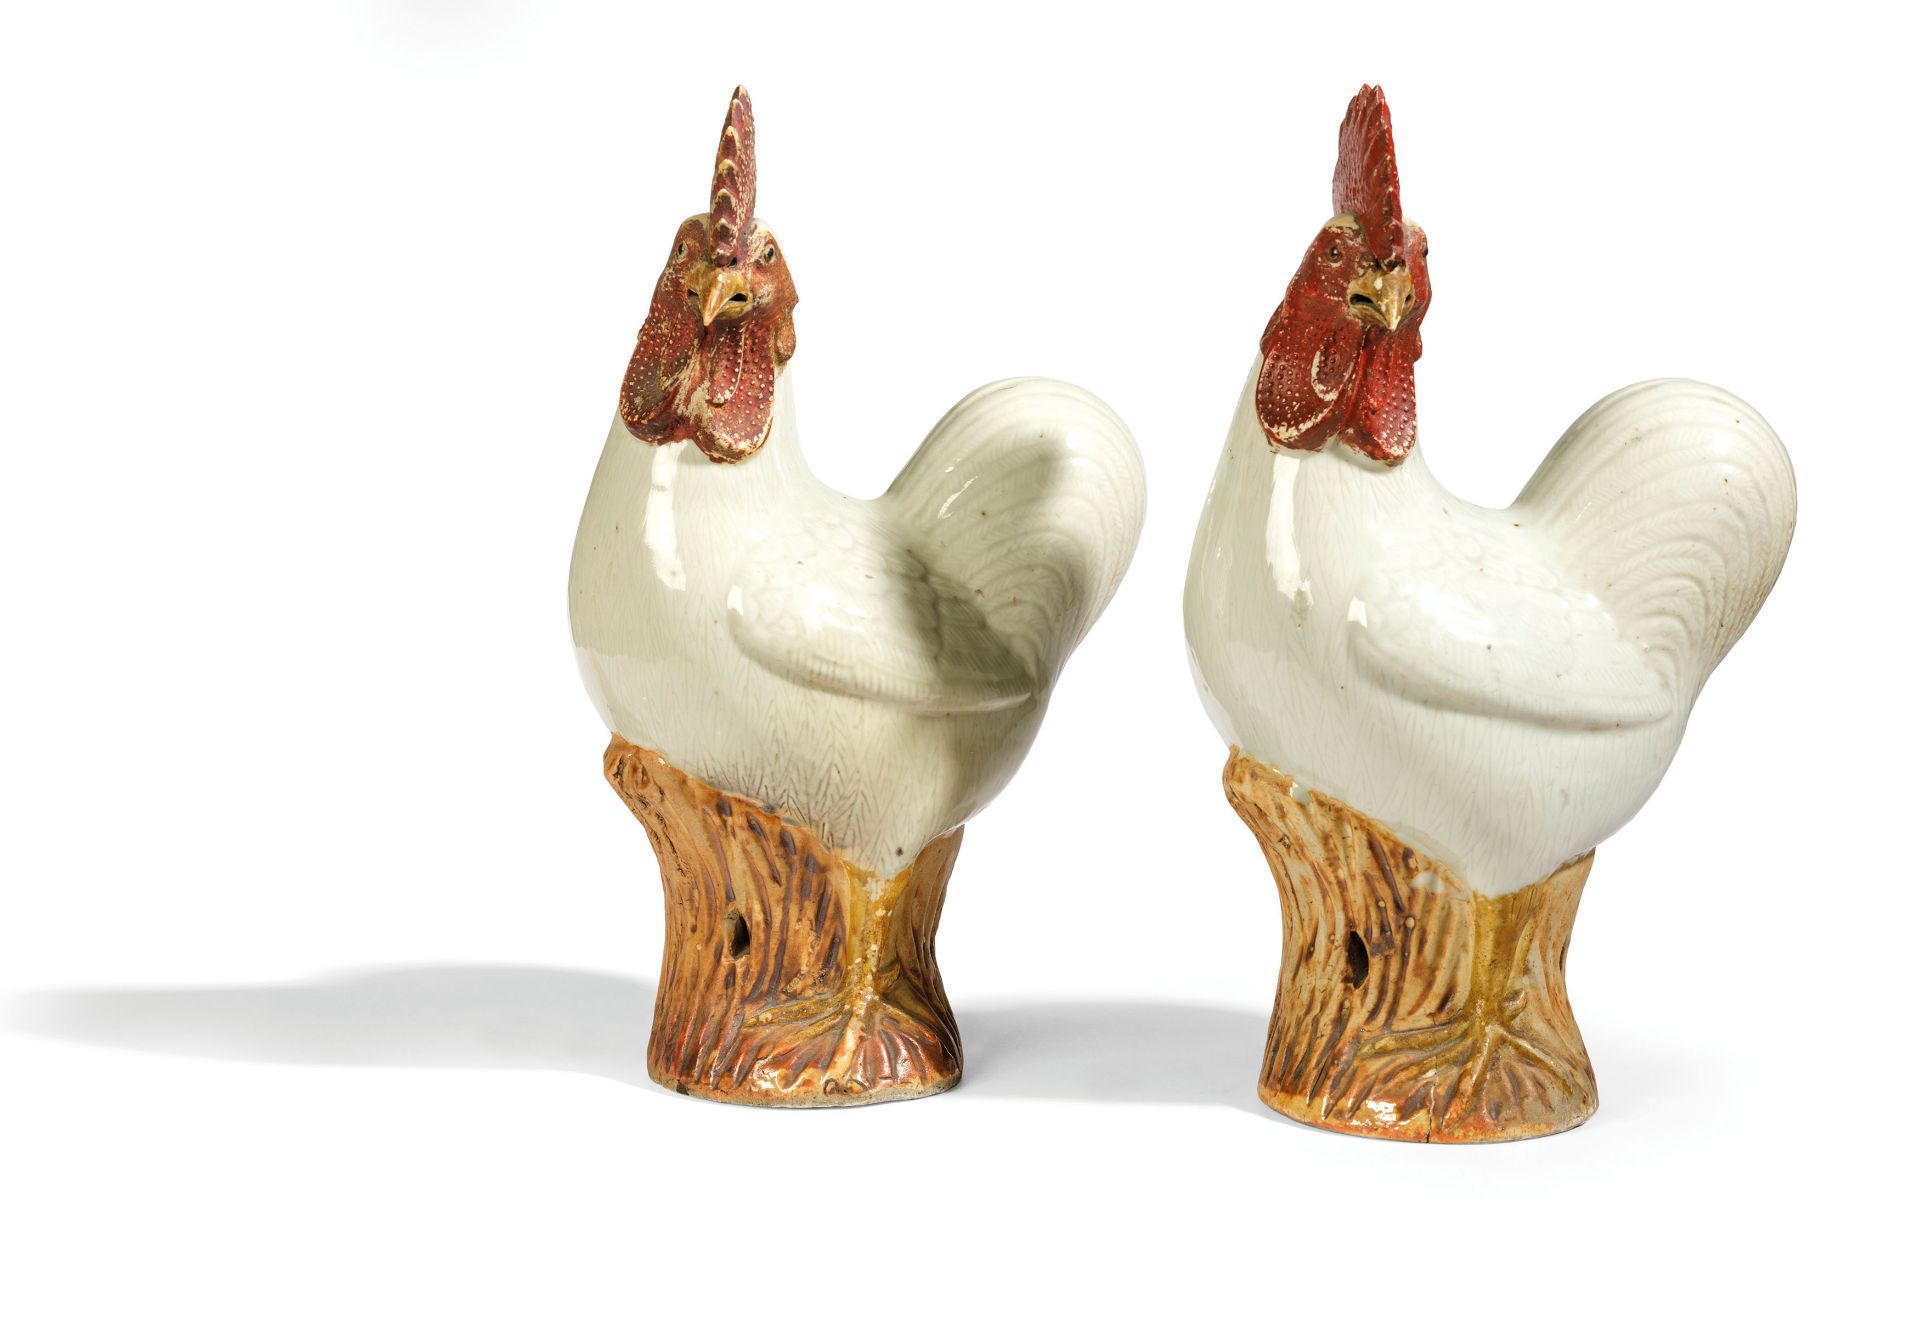 TWO PORCELAIN FIGURES OF STANDING COCKS, CHINA, 18TH-19TH CENTURY (2) - Image 3 of 3